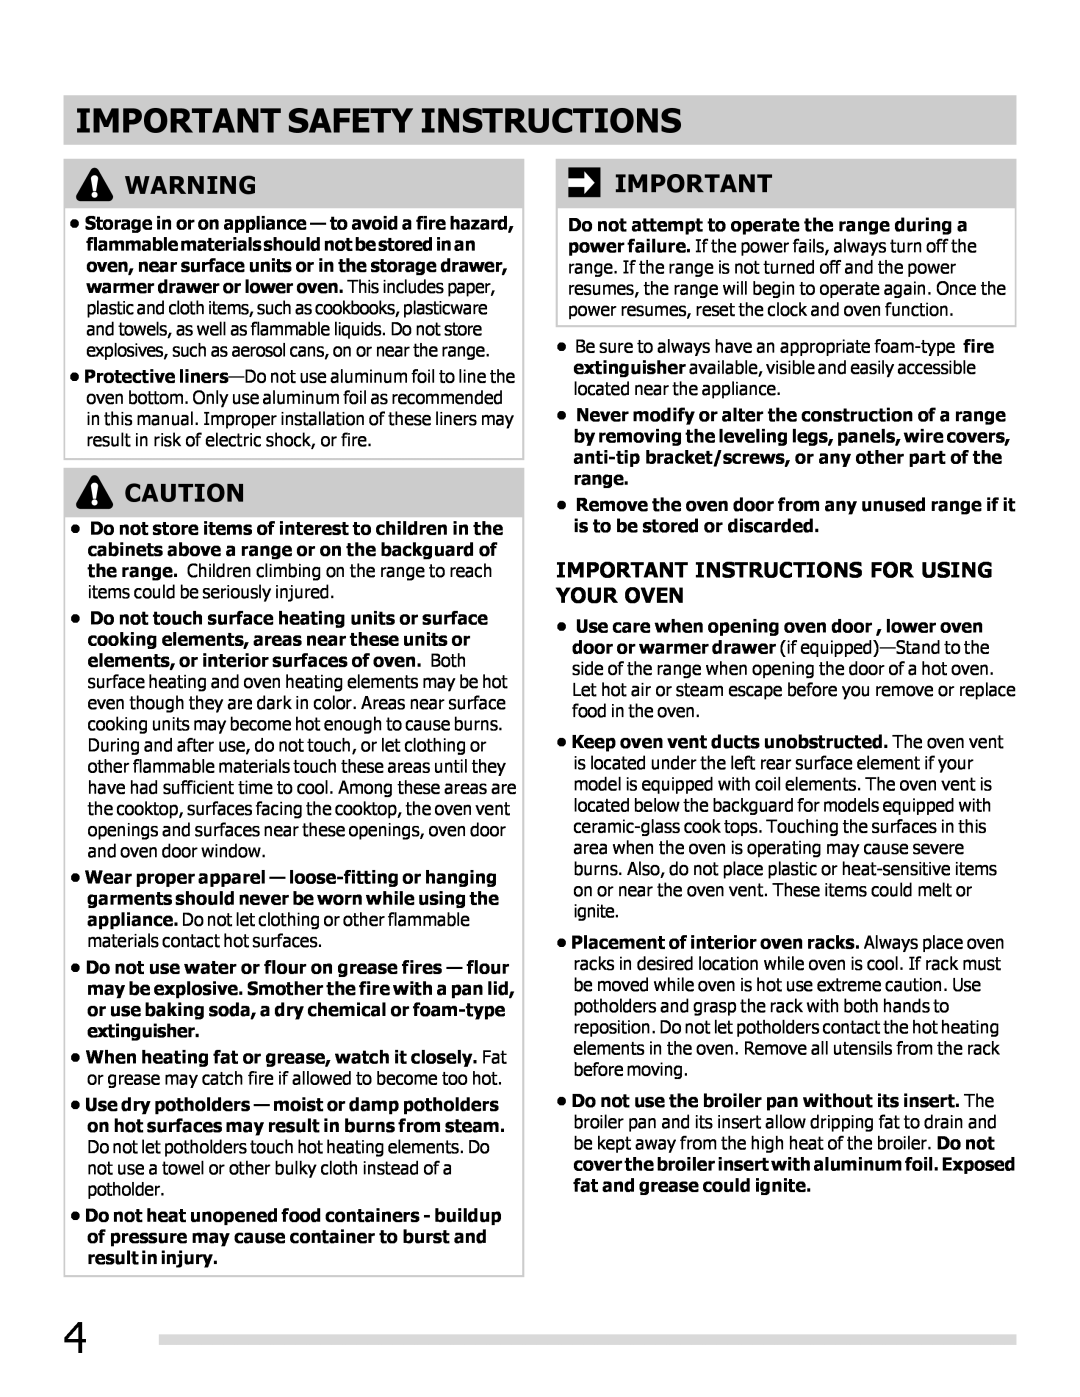 Frigidaire DGEF3031KW, FGEF3032MW, FGEF3032MB Important Instructions For Using Your Oven, Important Safety Instructions 